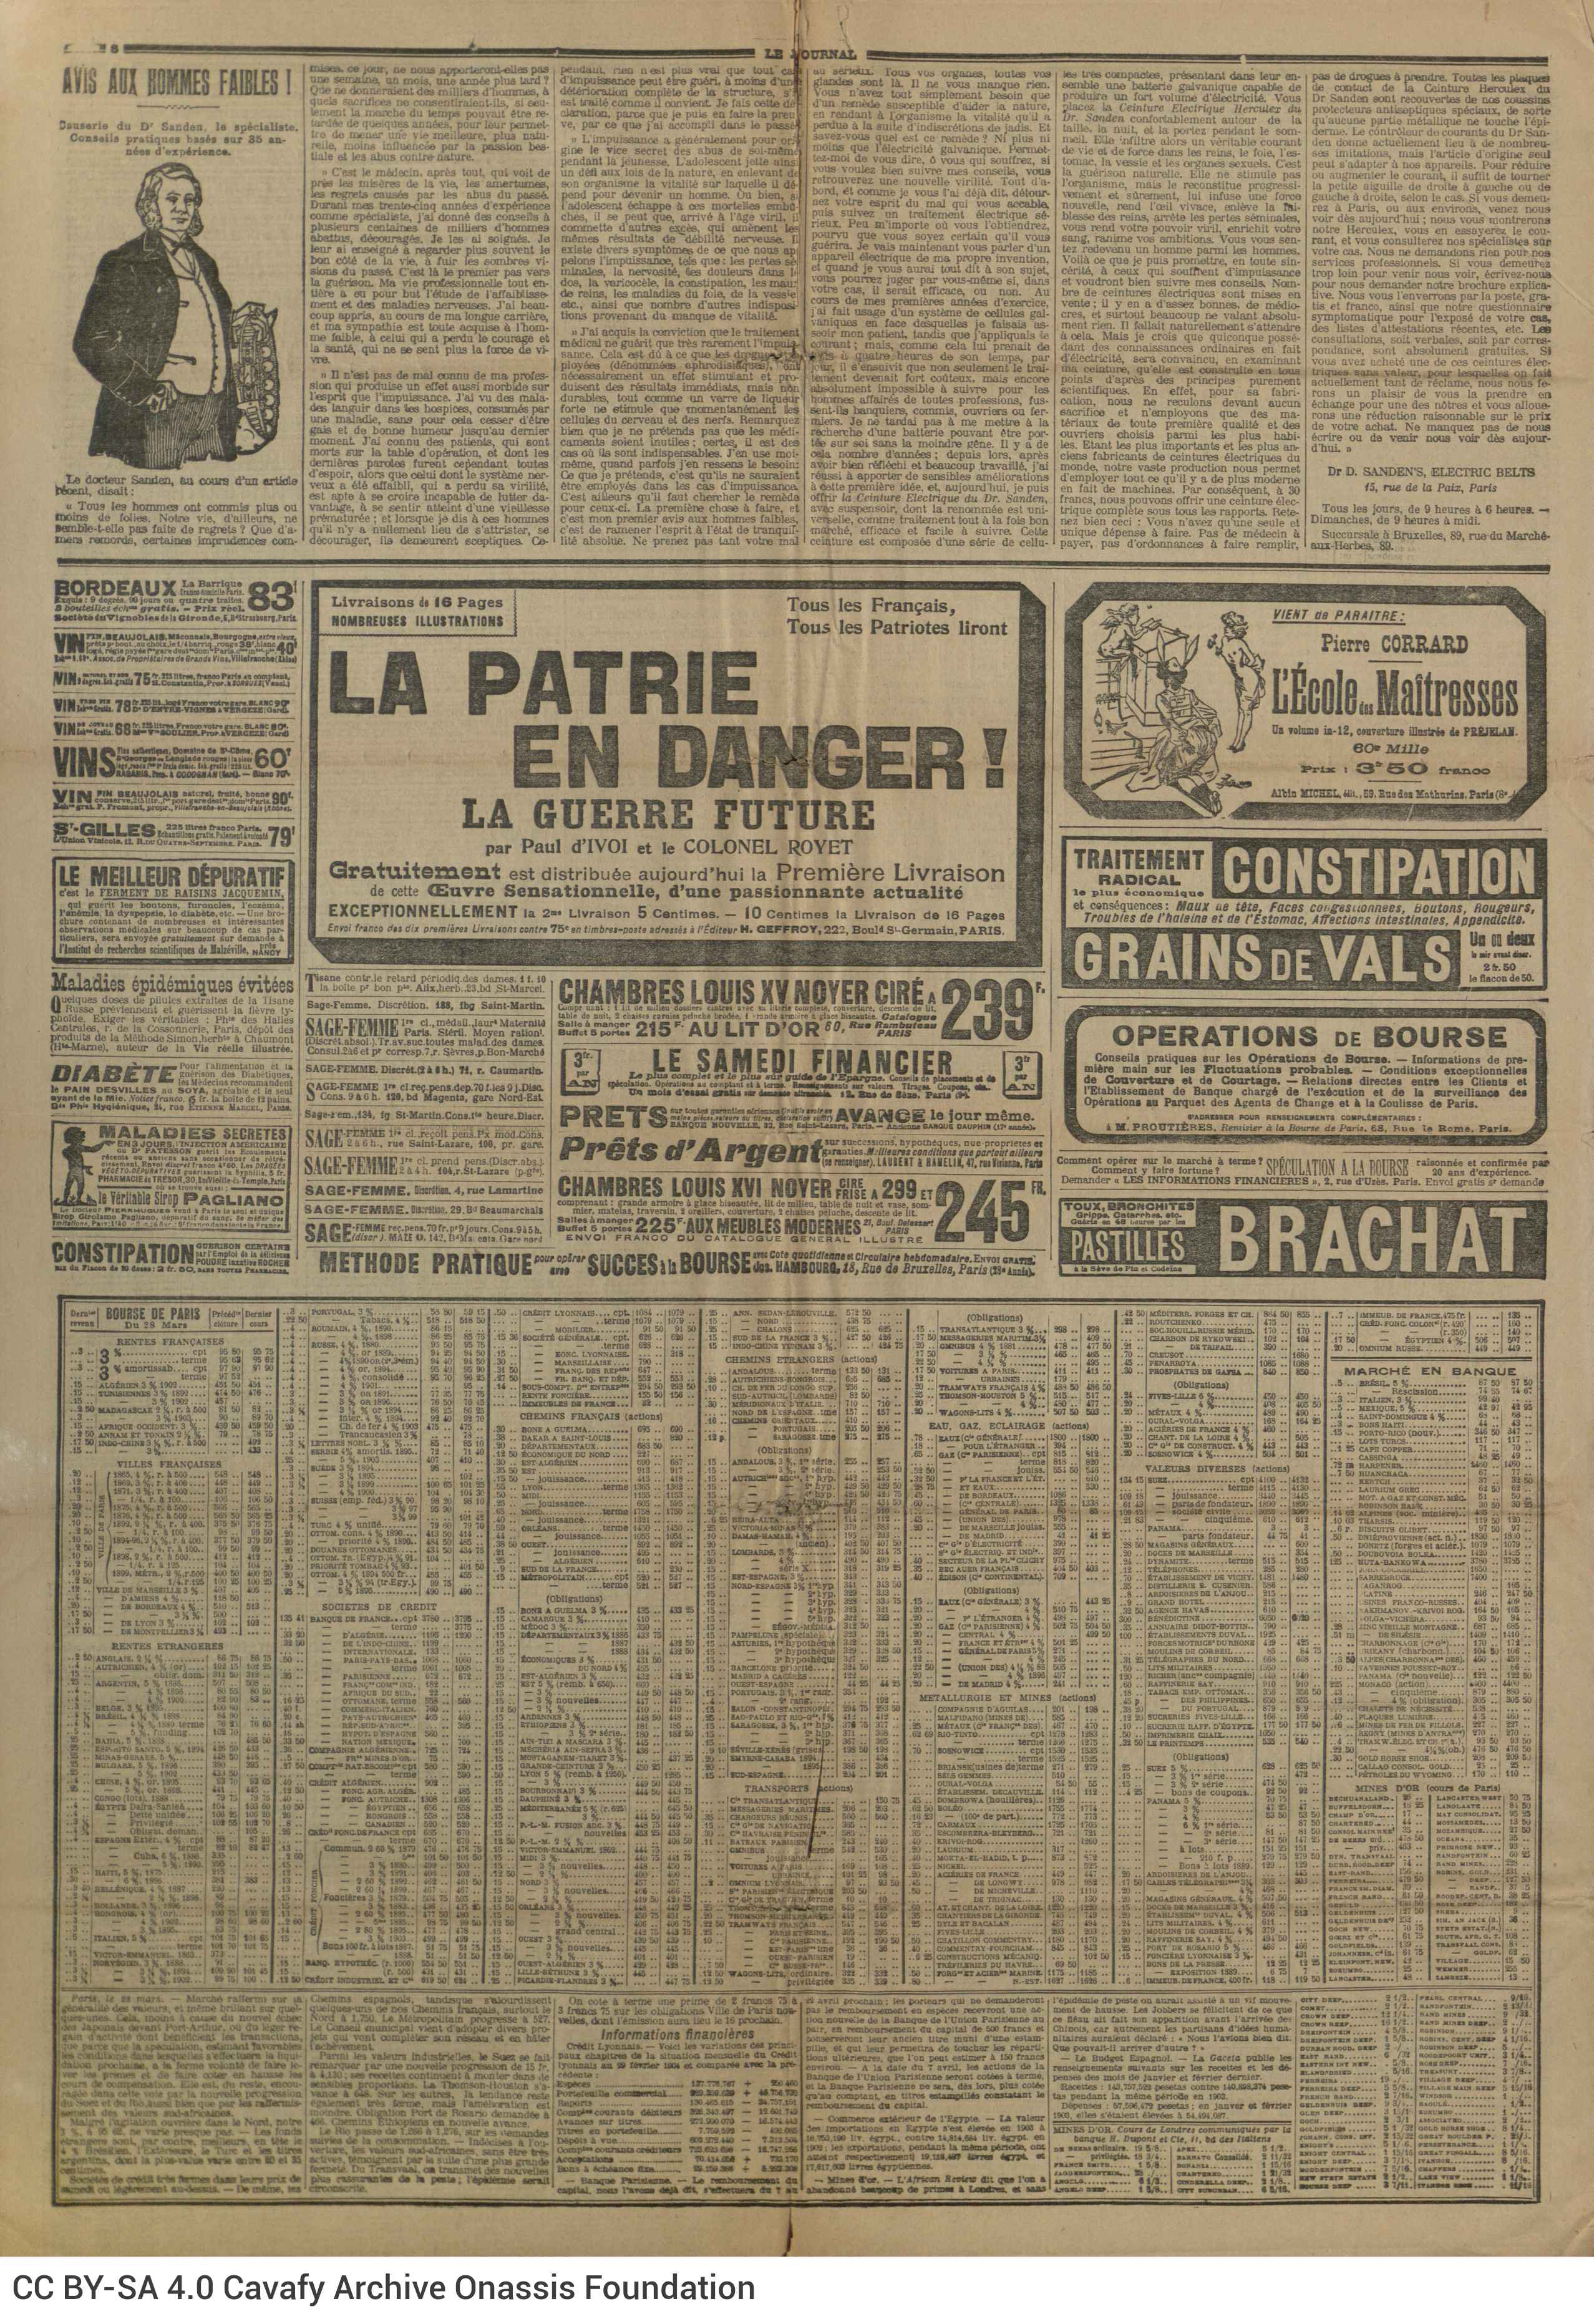 Seven editions of the Paris newspaper *Le Matin* and five editions of another Paris newspaper, *Le Journal*. They are accompa